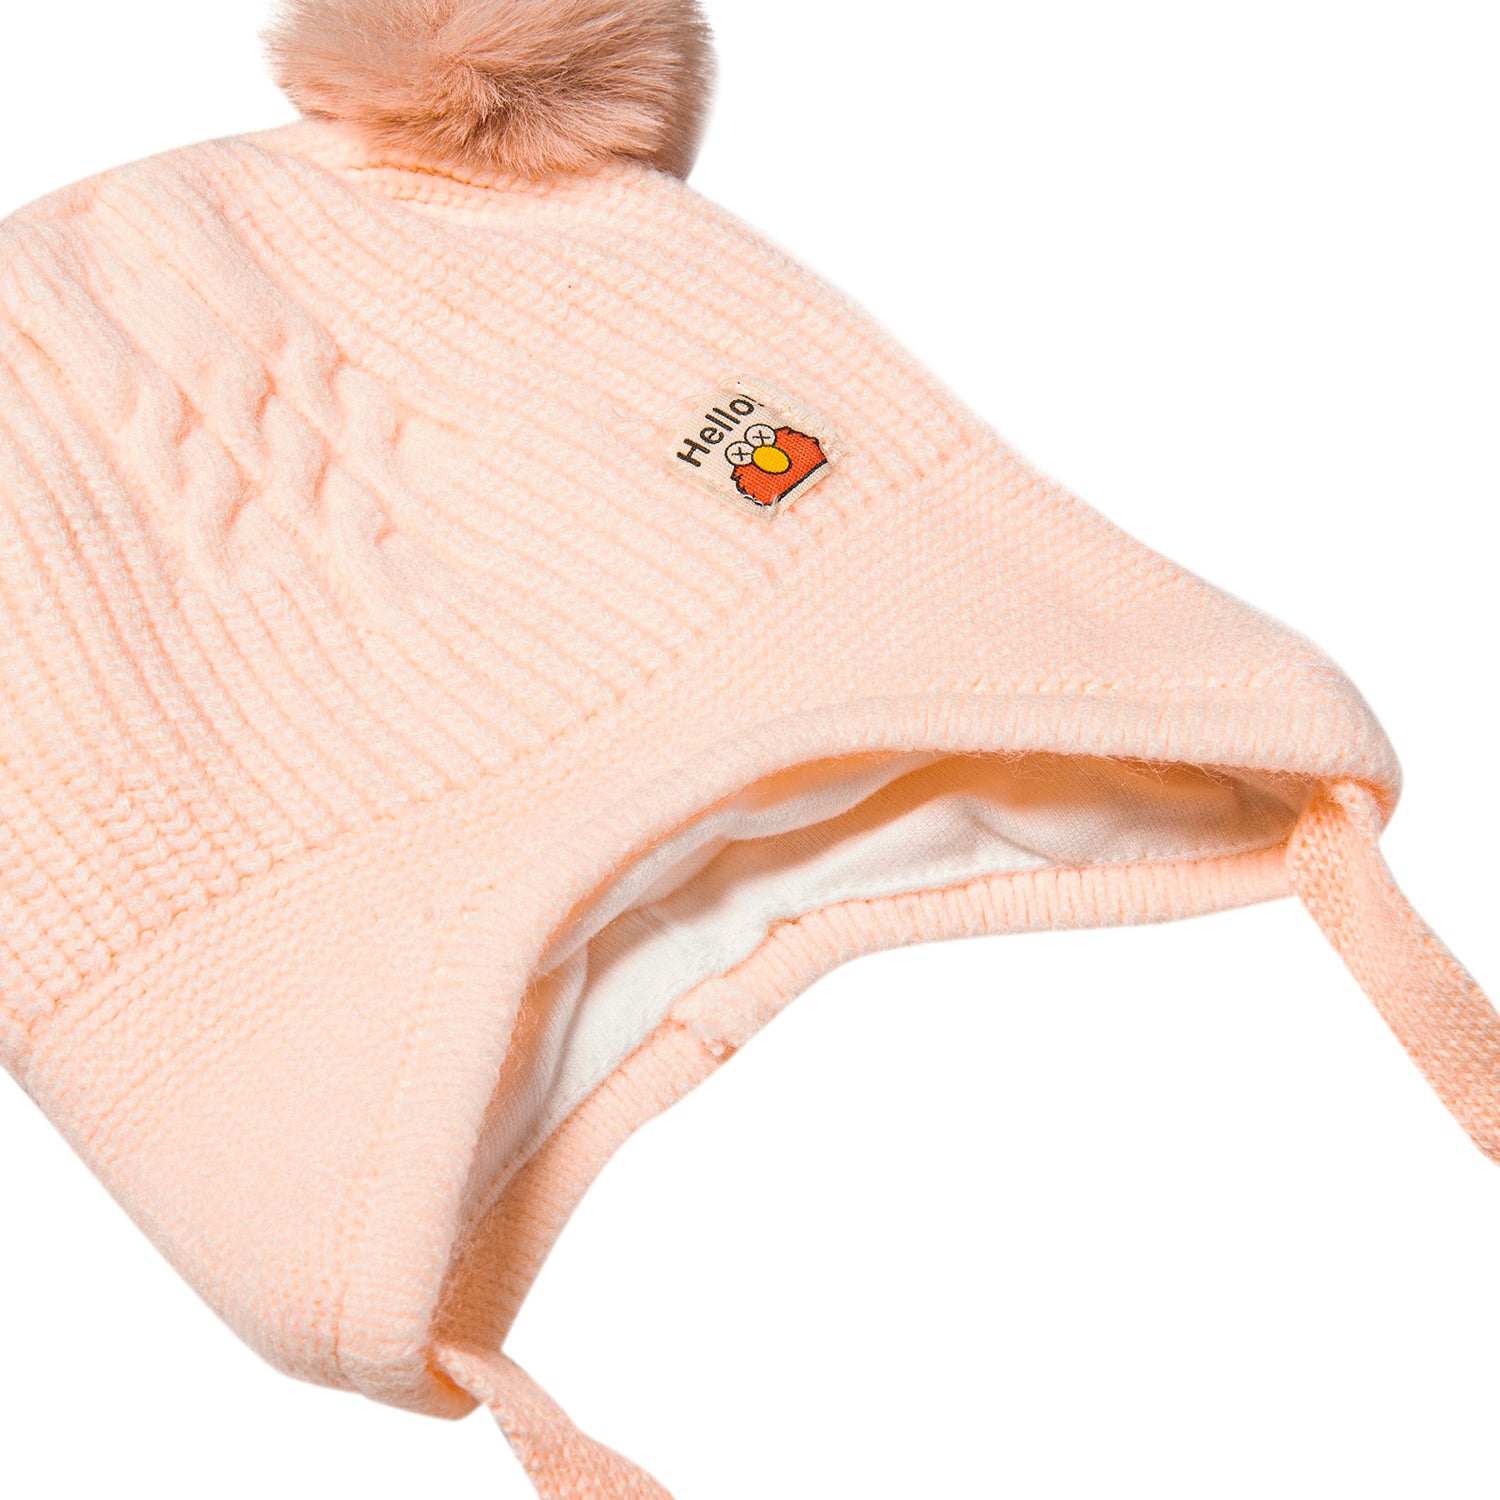 Knit Woollen Cap With Tie Knot For Ear Protection Solid Peach